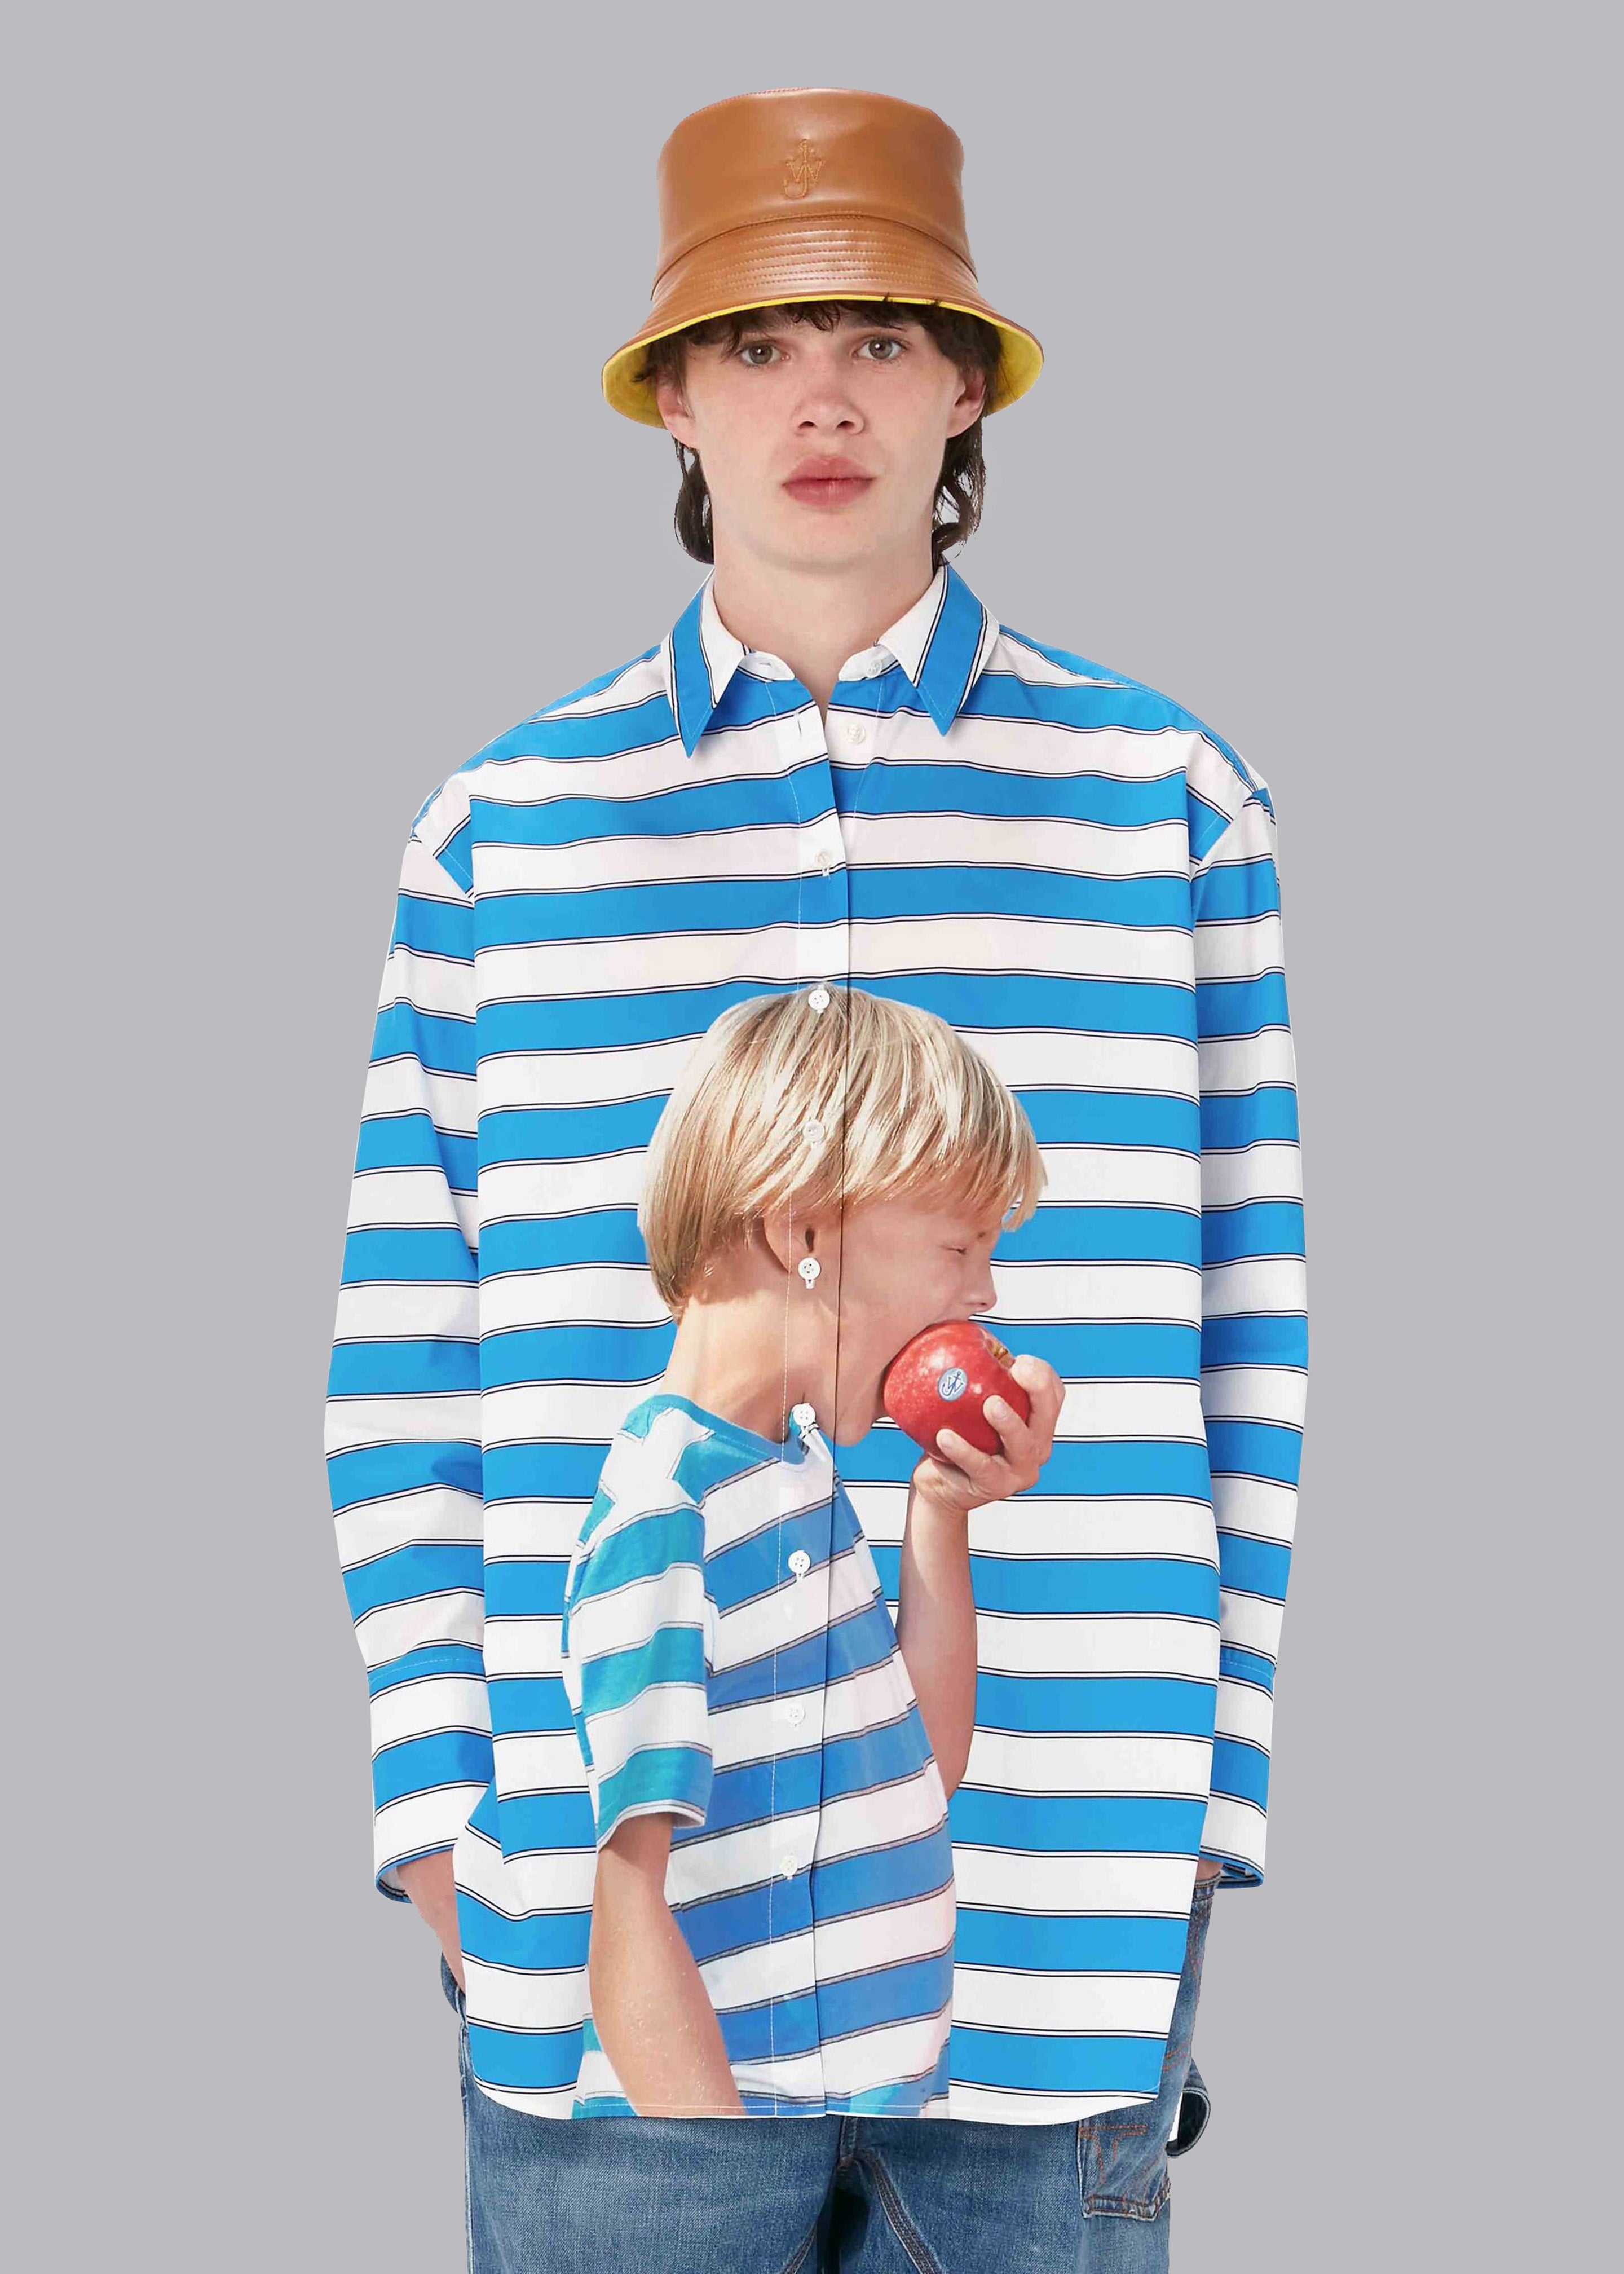 JW Anderson Boy with Apple Oversized Shirt - Blue/White - 1